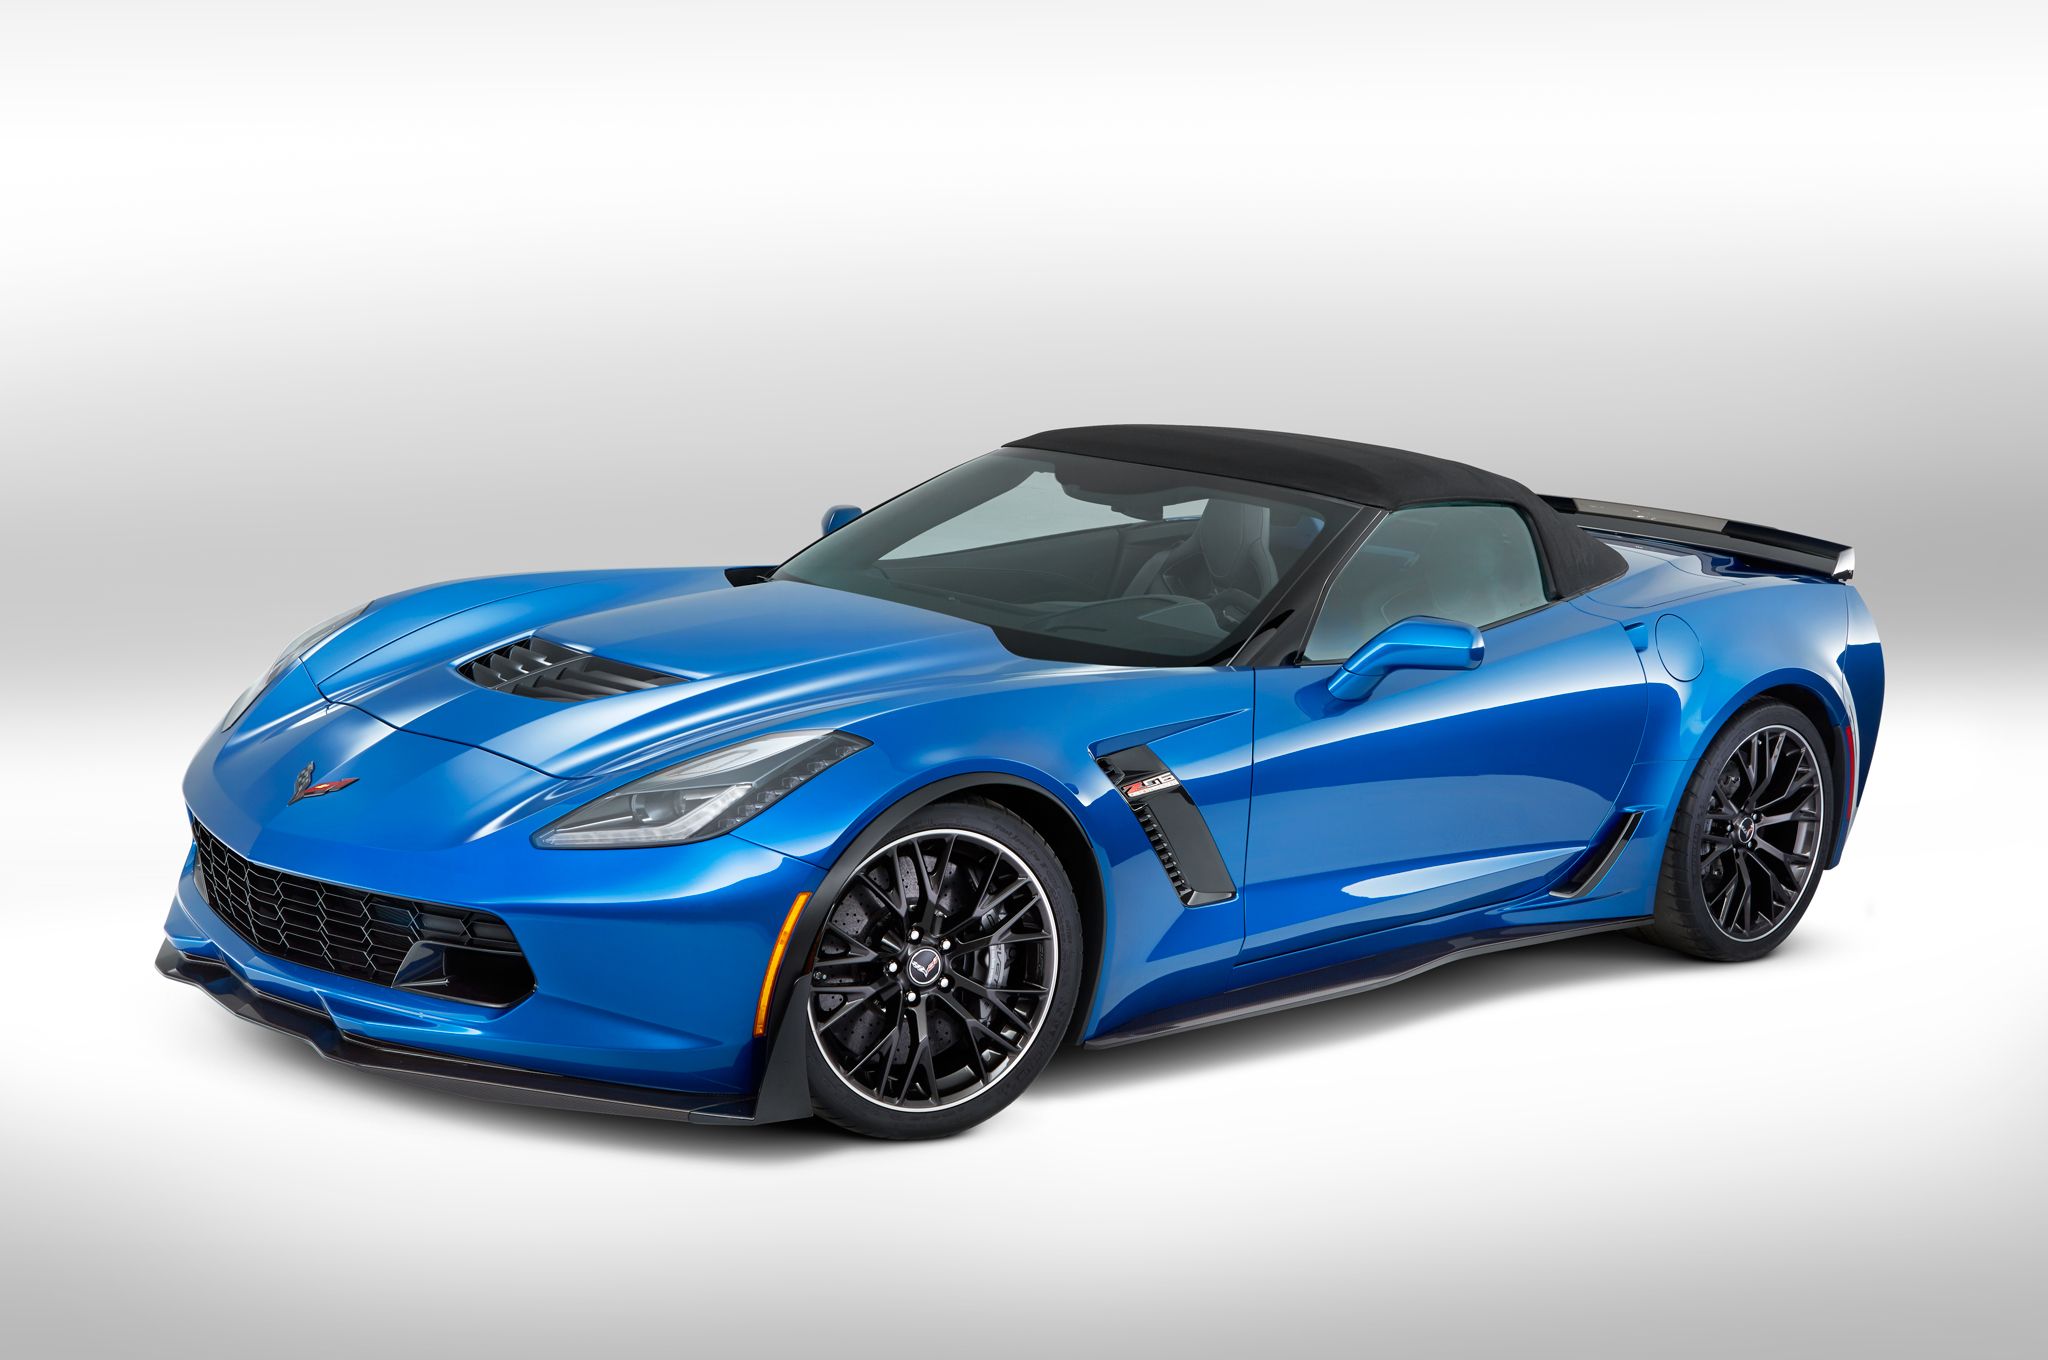 http://static2.therichestimages.com/cdn/1000/664/90/cw/wp-content/uploads/2015/04/Chevrolet-Corvette-2016-Release-date.jpg